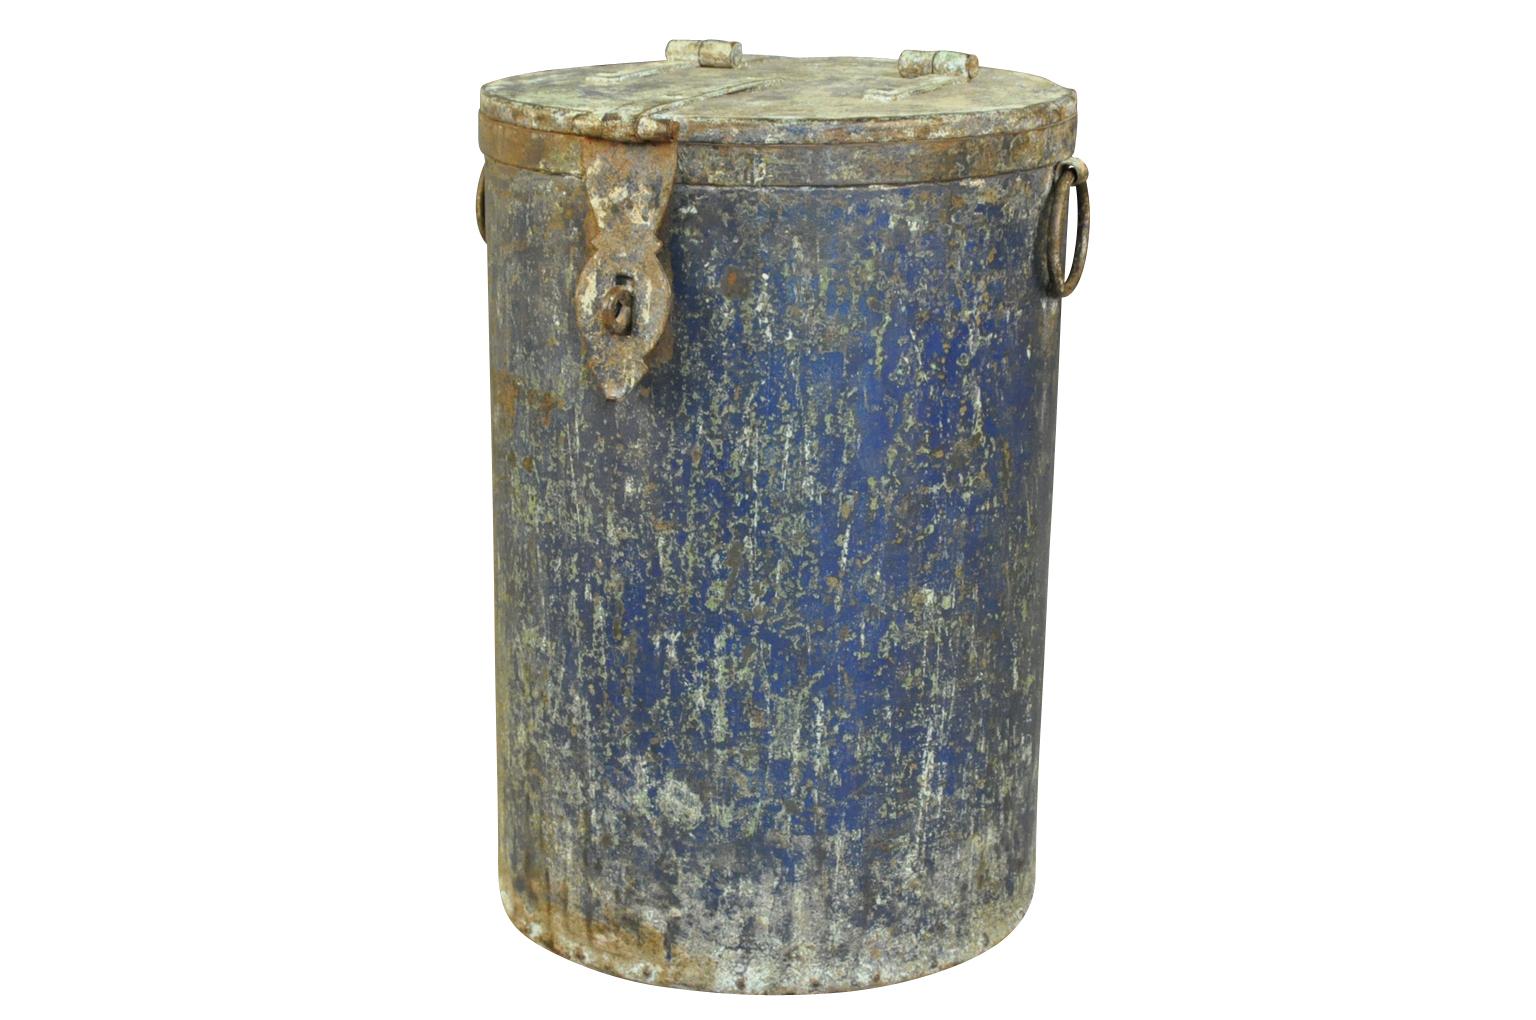 A very charming later 19th century Spanish lidded container in painted iron. A terrific accent piece.